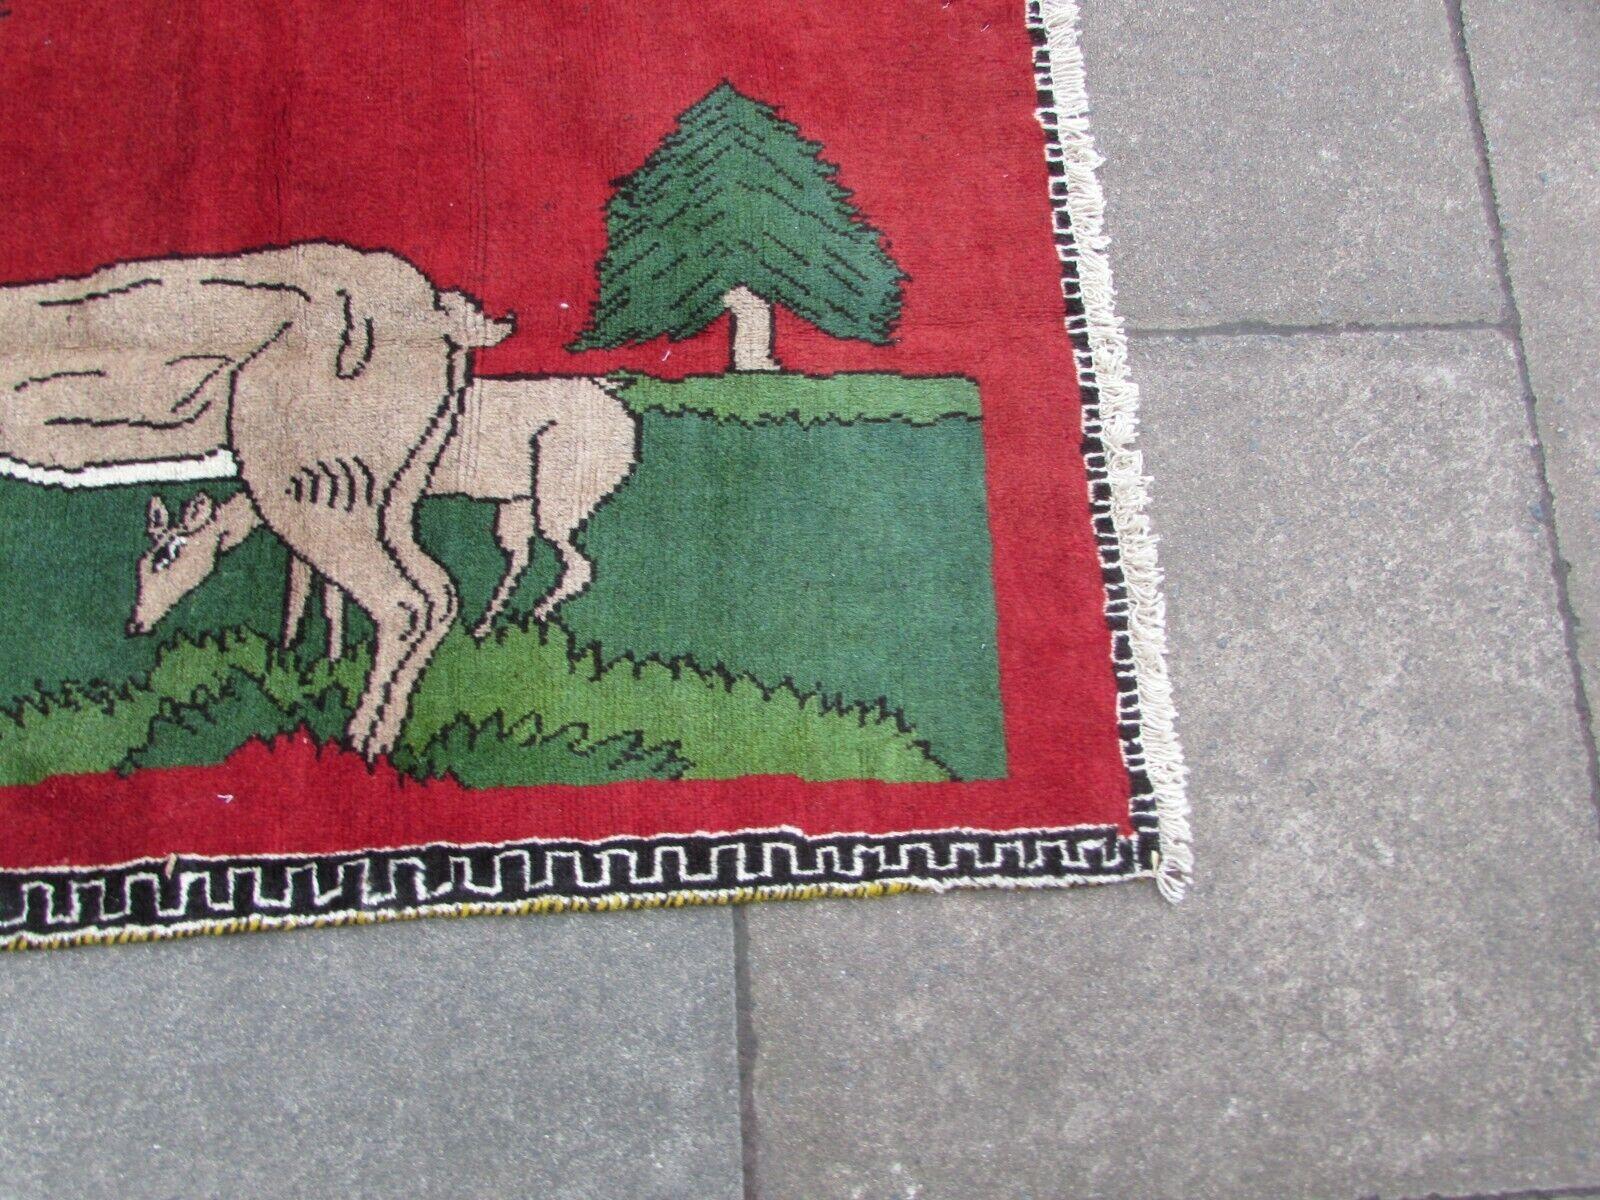 Hand-Knotted Handmade Vintage Persian Style Gabbeh Rug With Deer 2.6' x 4', 1970s - 1Q71 For Sale